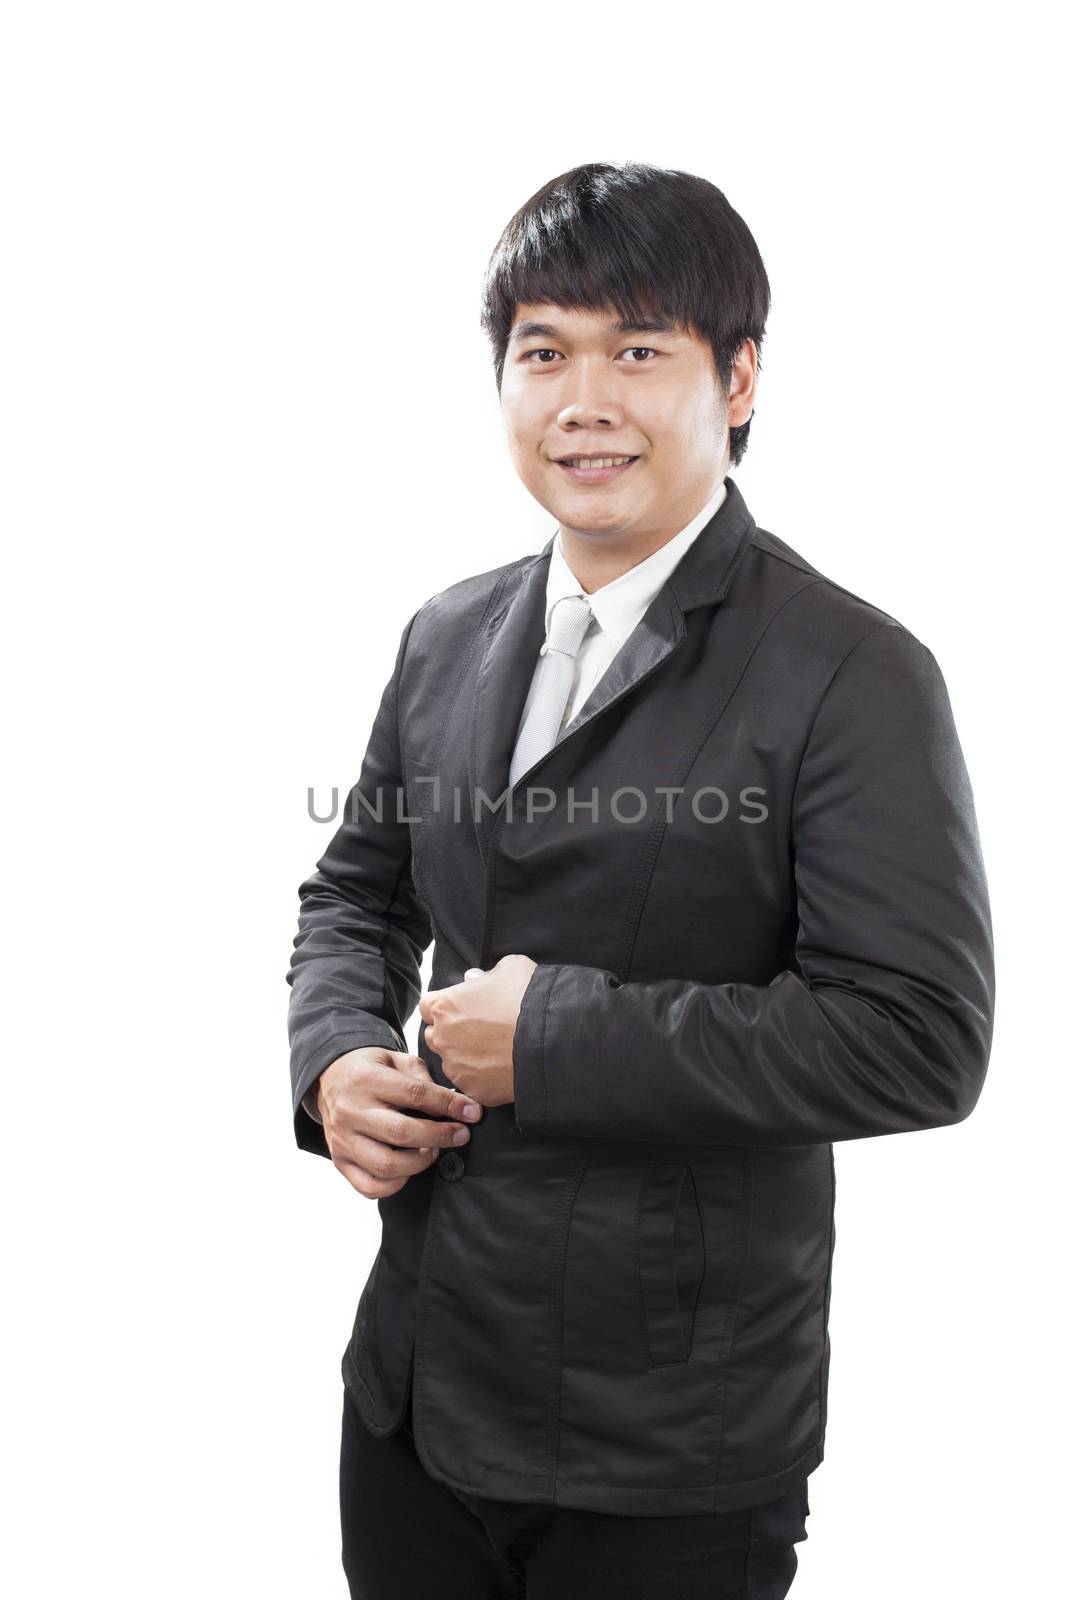 young business man with western suit standing in front of white  by khunaspix